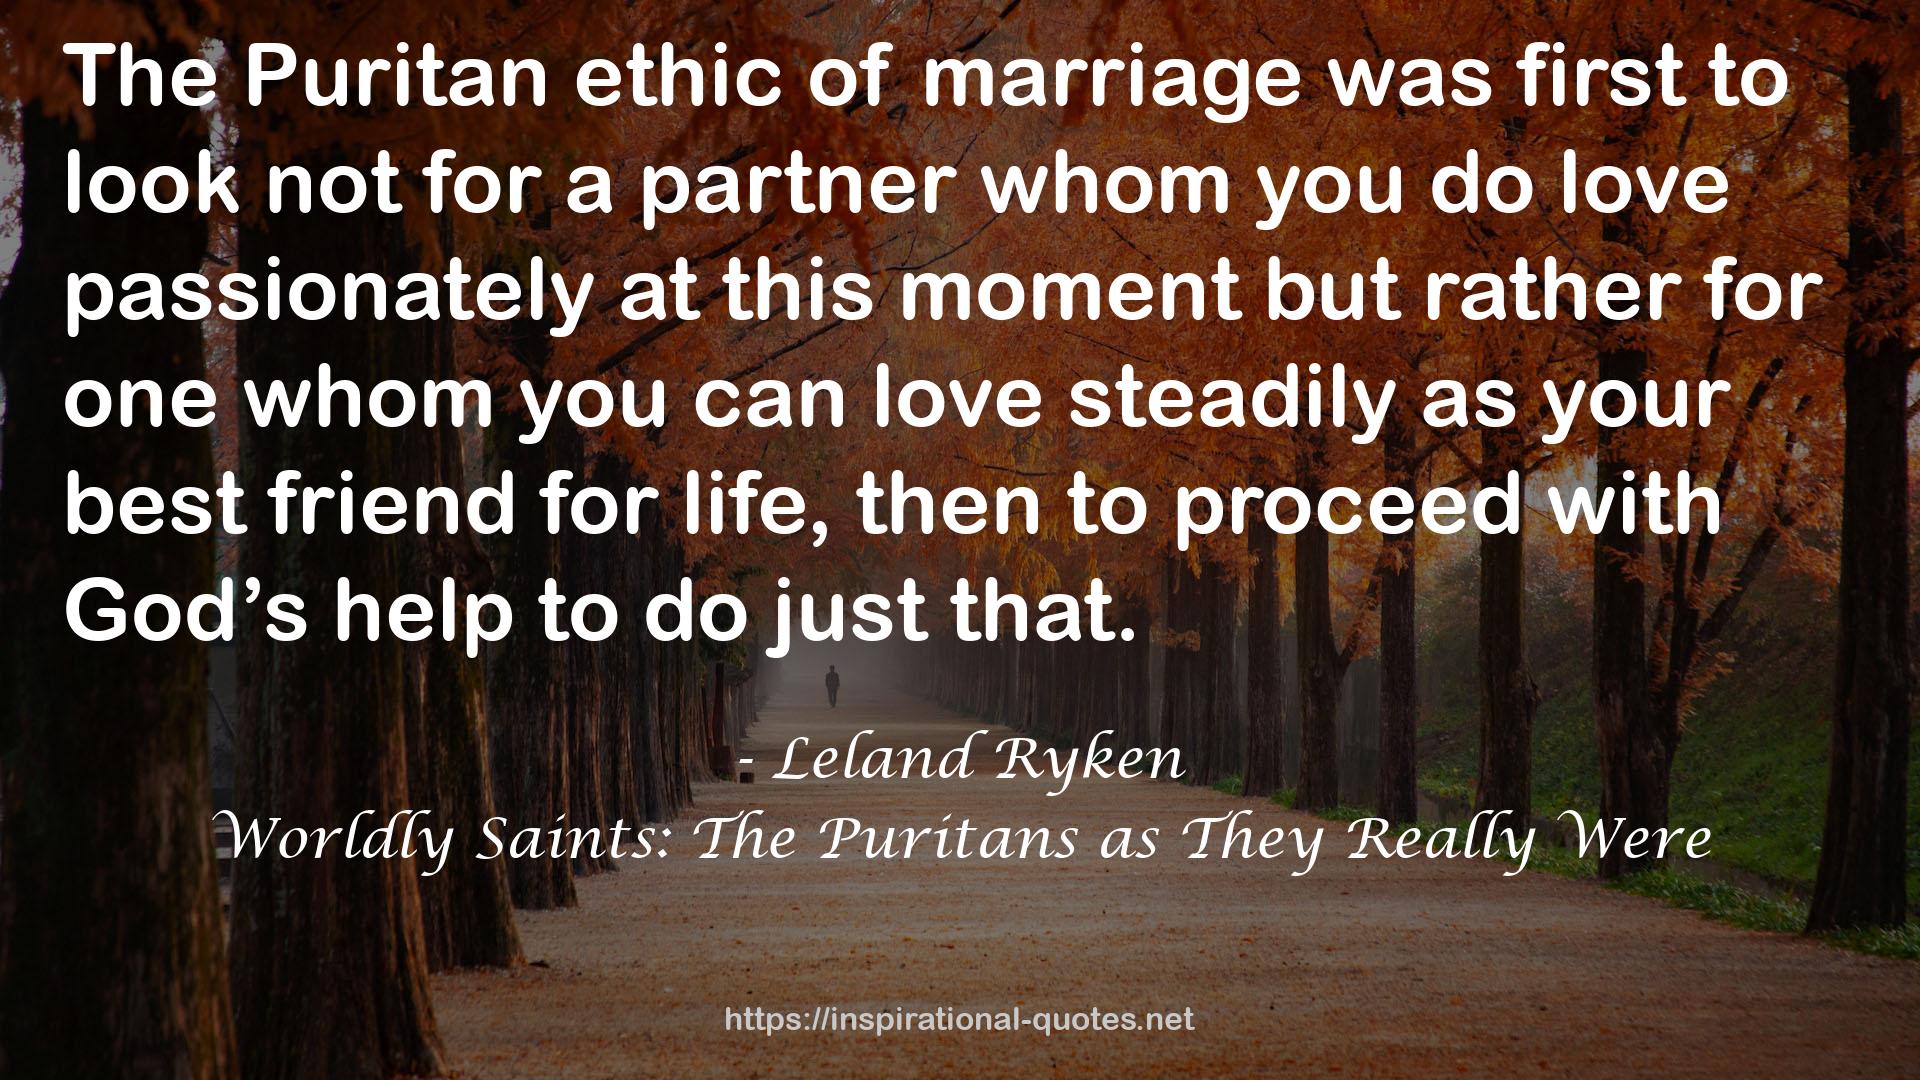 Worldly Saints: The Puritans as They Really Were QUOTES